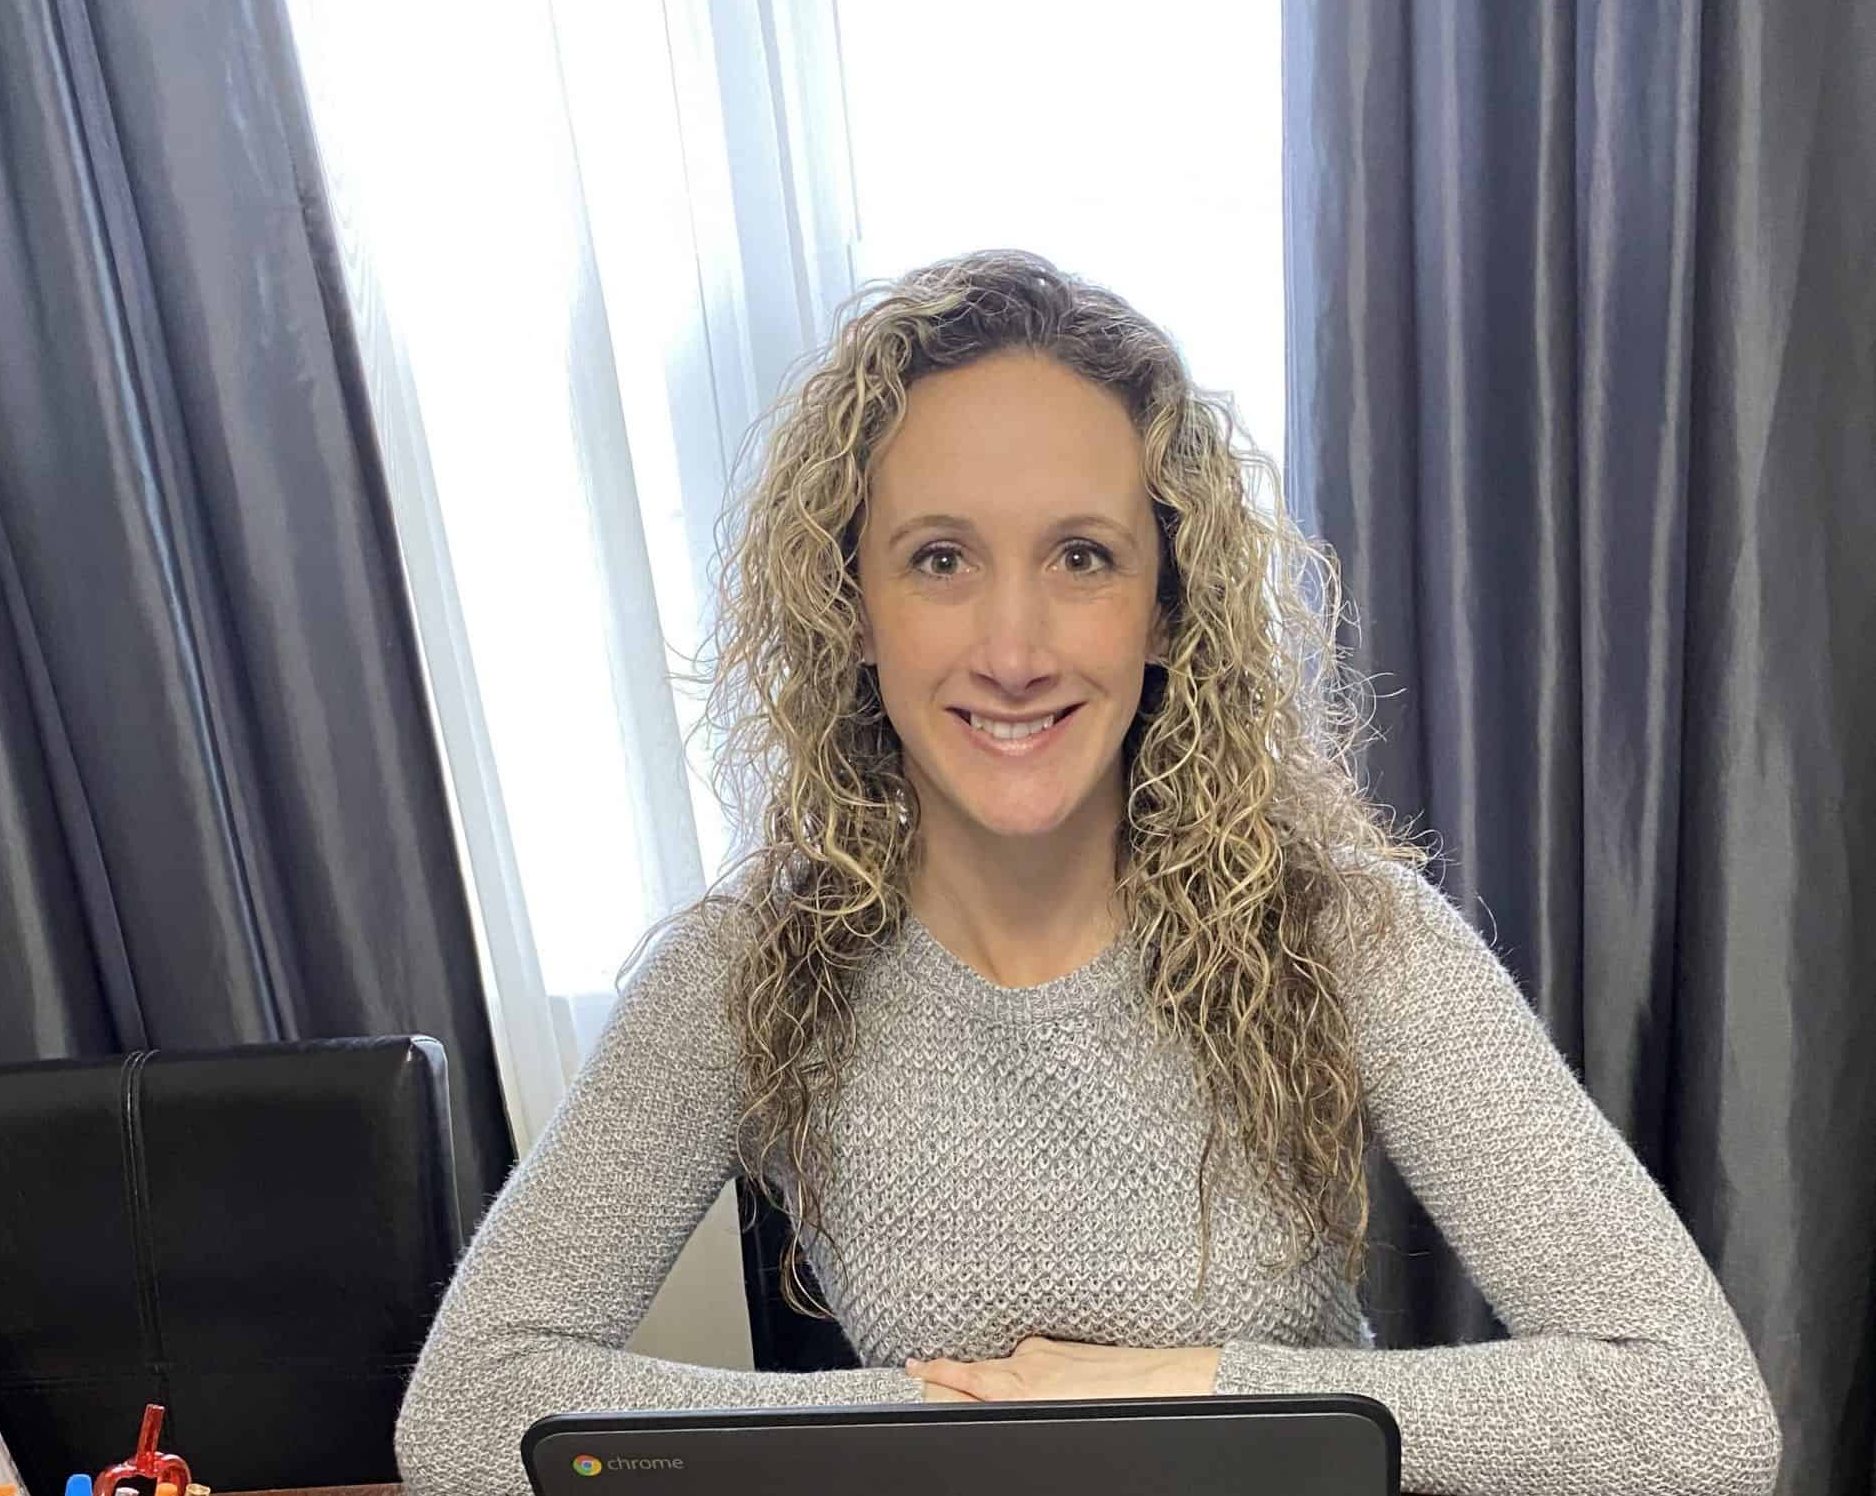 Read more about the article Milken Award winner Nikki Silva shares tips for connecting with students during remote learning